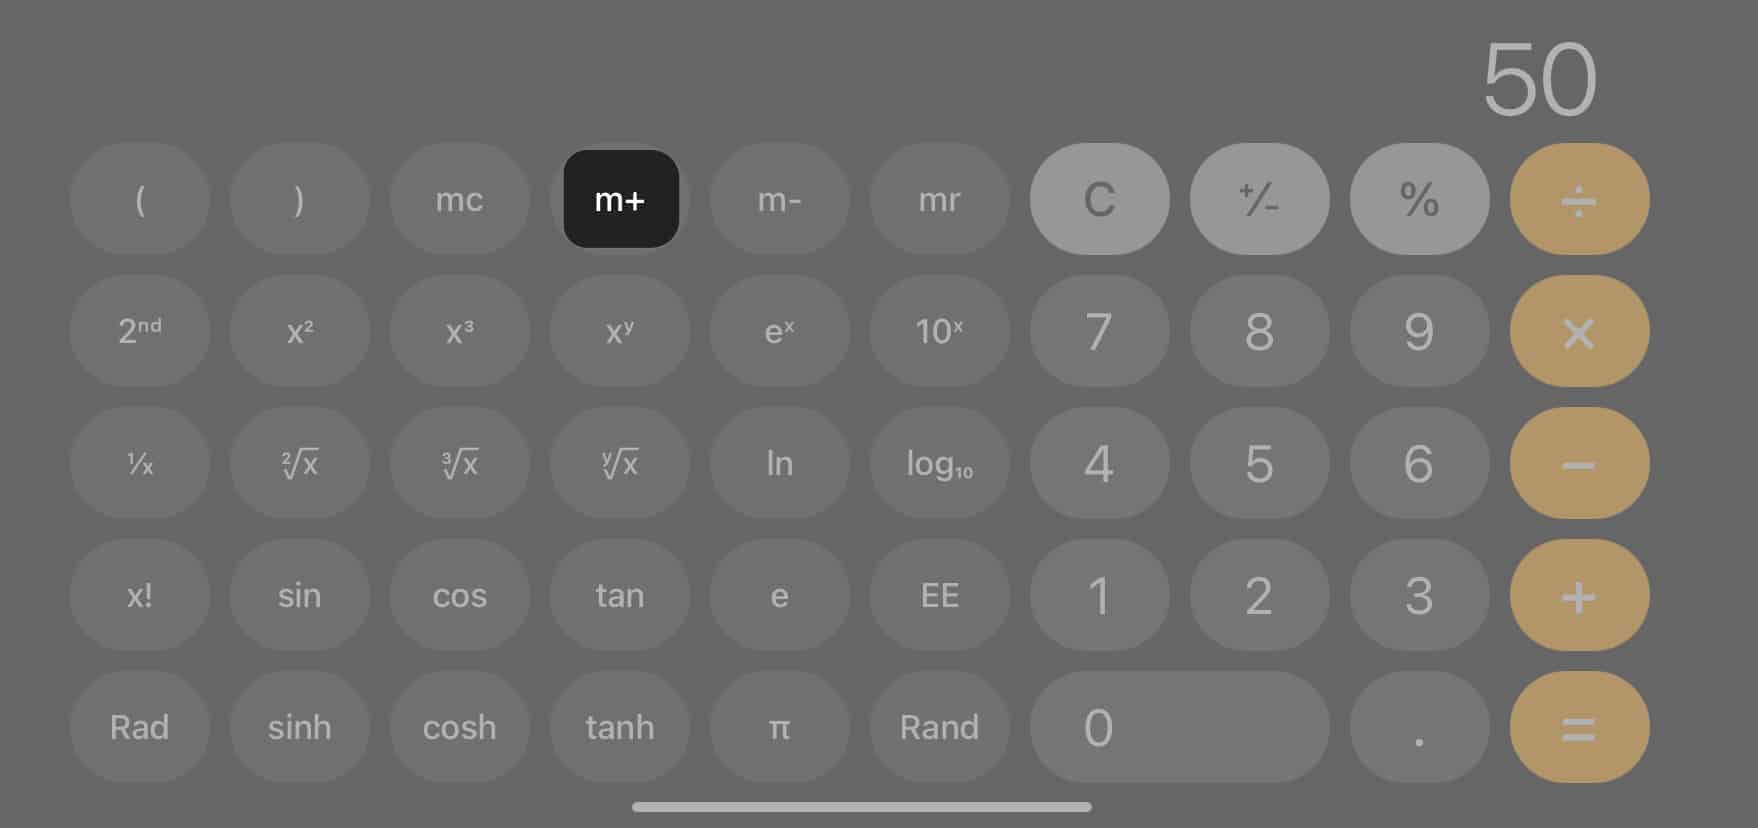 tap m+ button to save calculator history on iphone